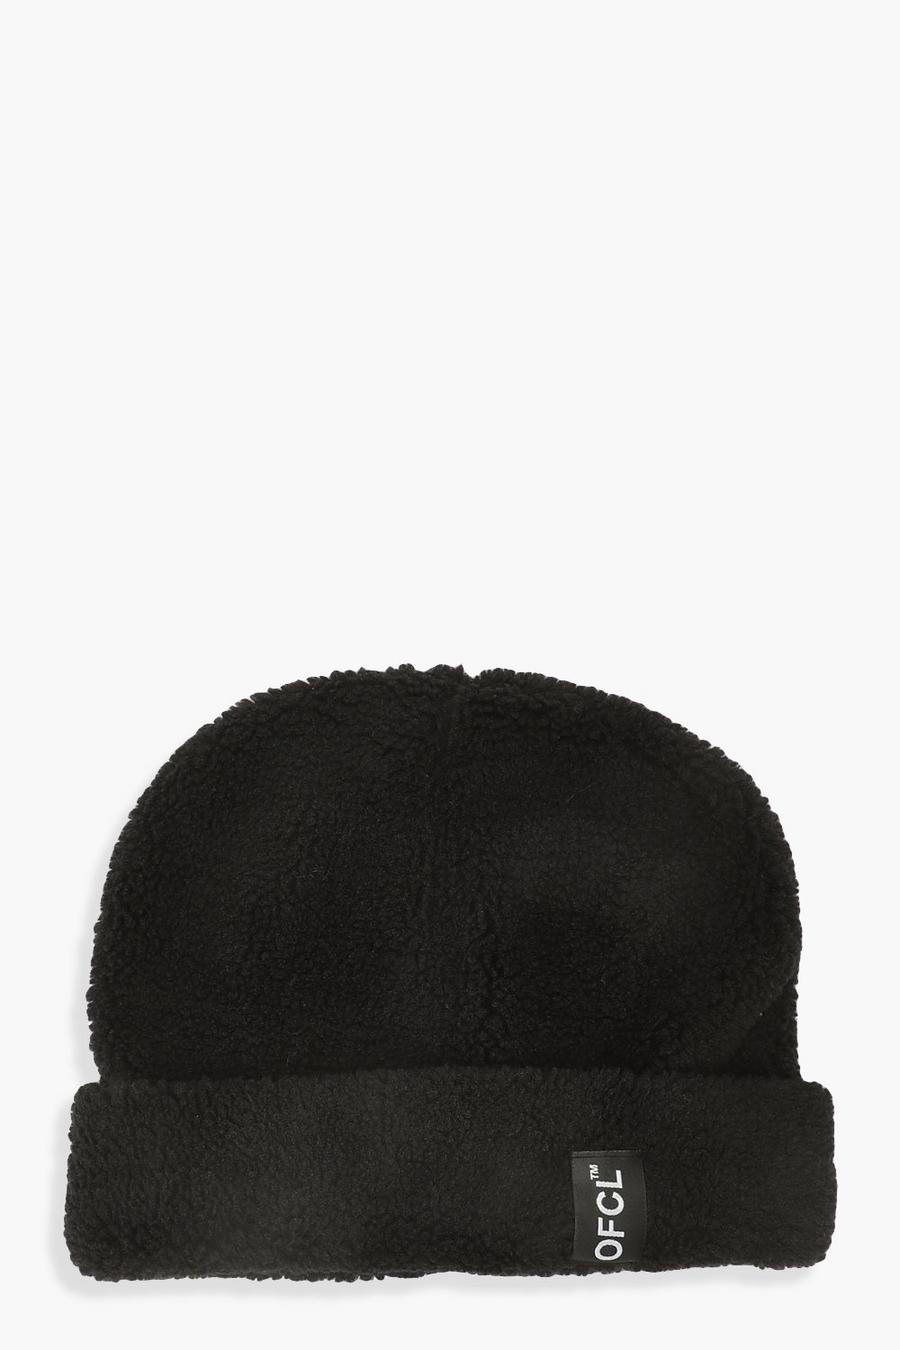 Black Offcl Borg Woven Tab Beanie image number 1